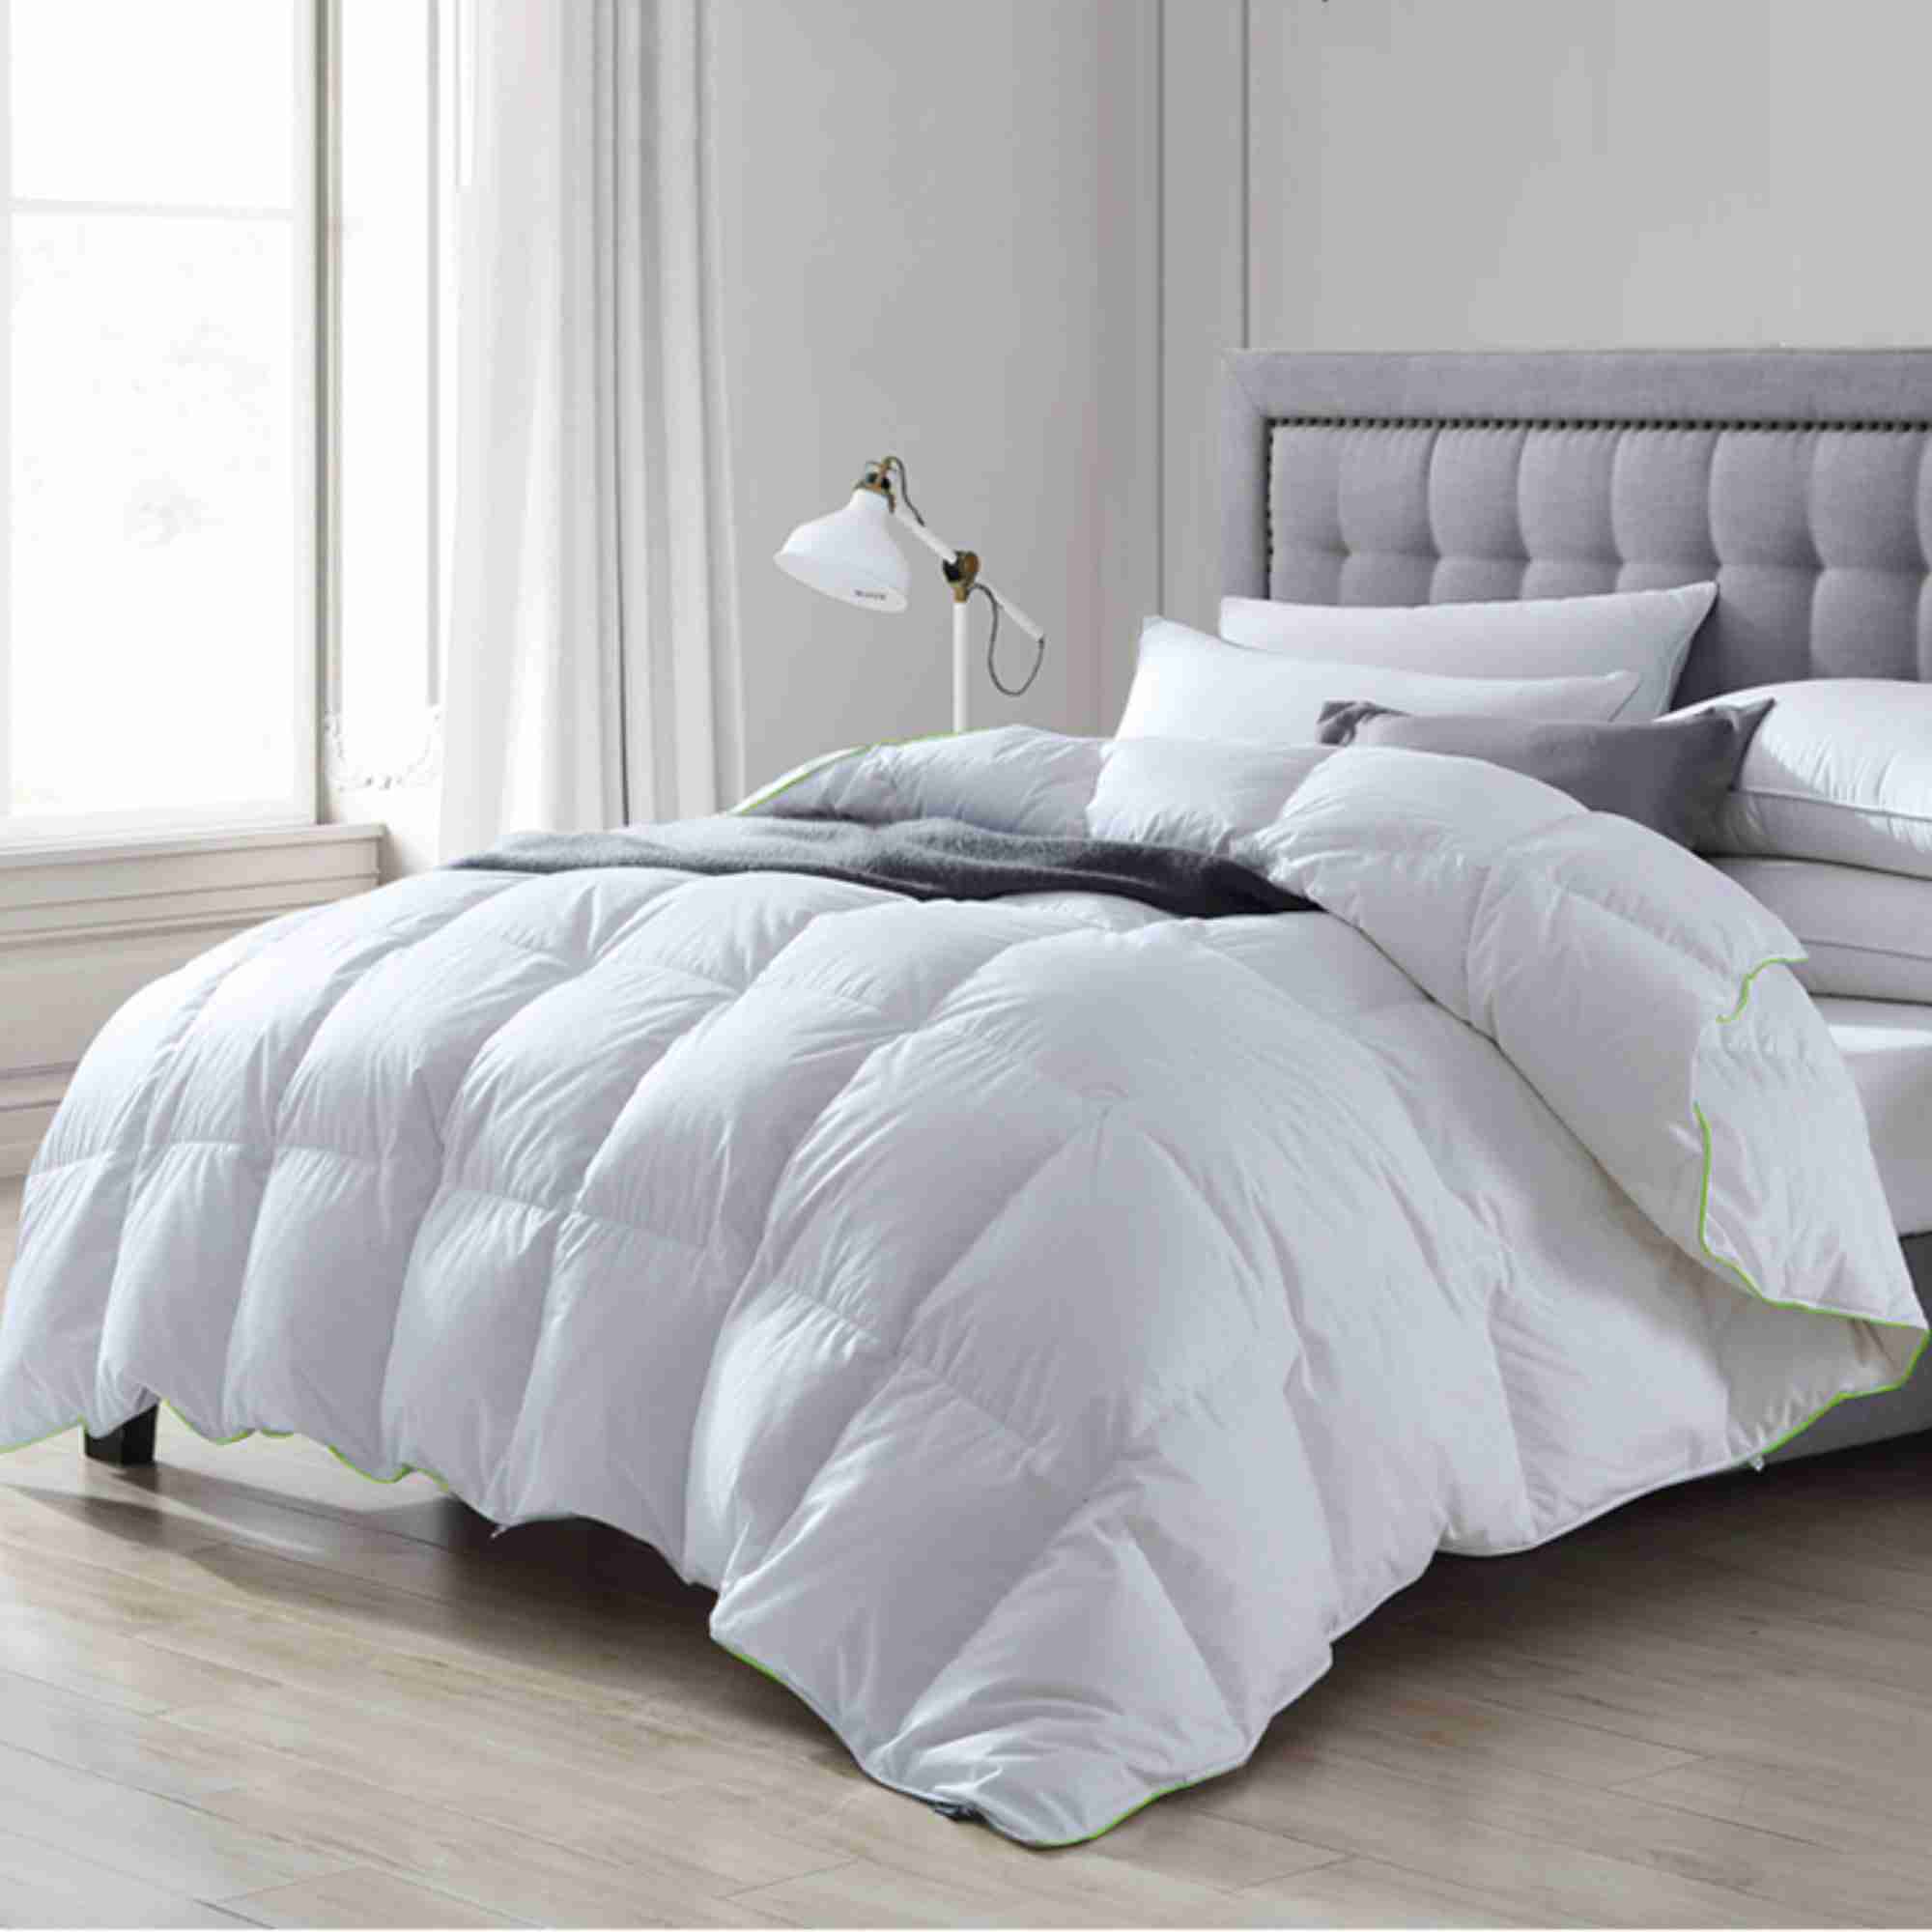 home-bedding-feather-down-comforter with cash back rebate